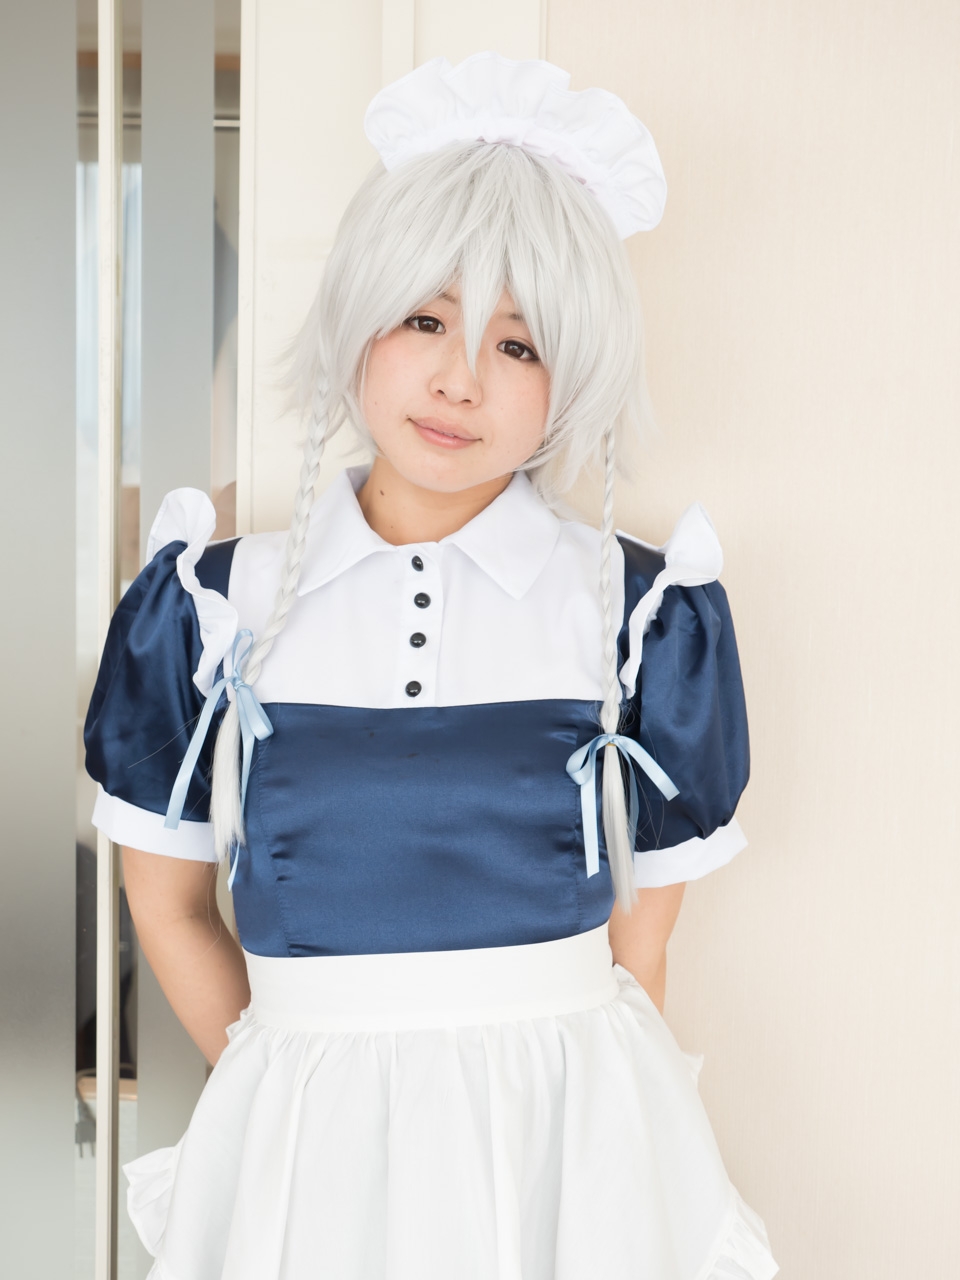 [Sakaki Cosplay Mistress] Sakaki Cosplay Mistress DL 001 (Touhou Project) 179